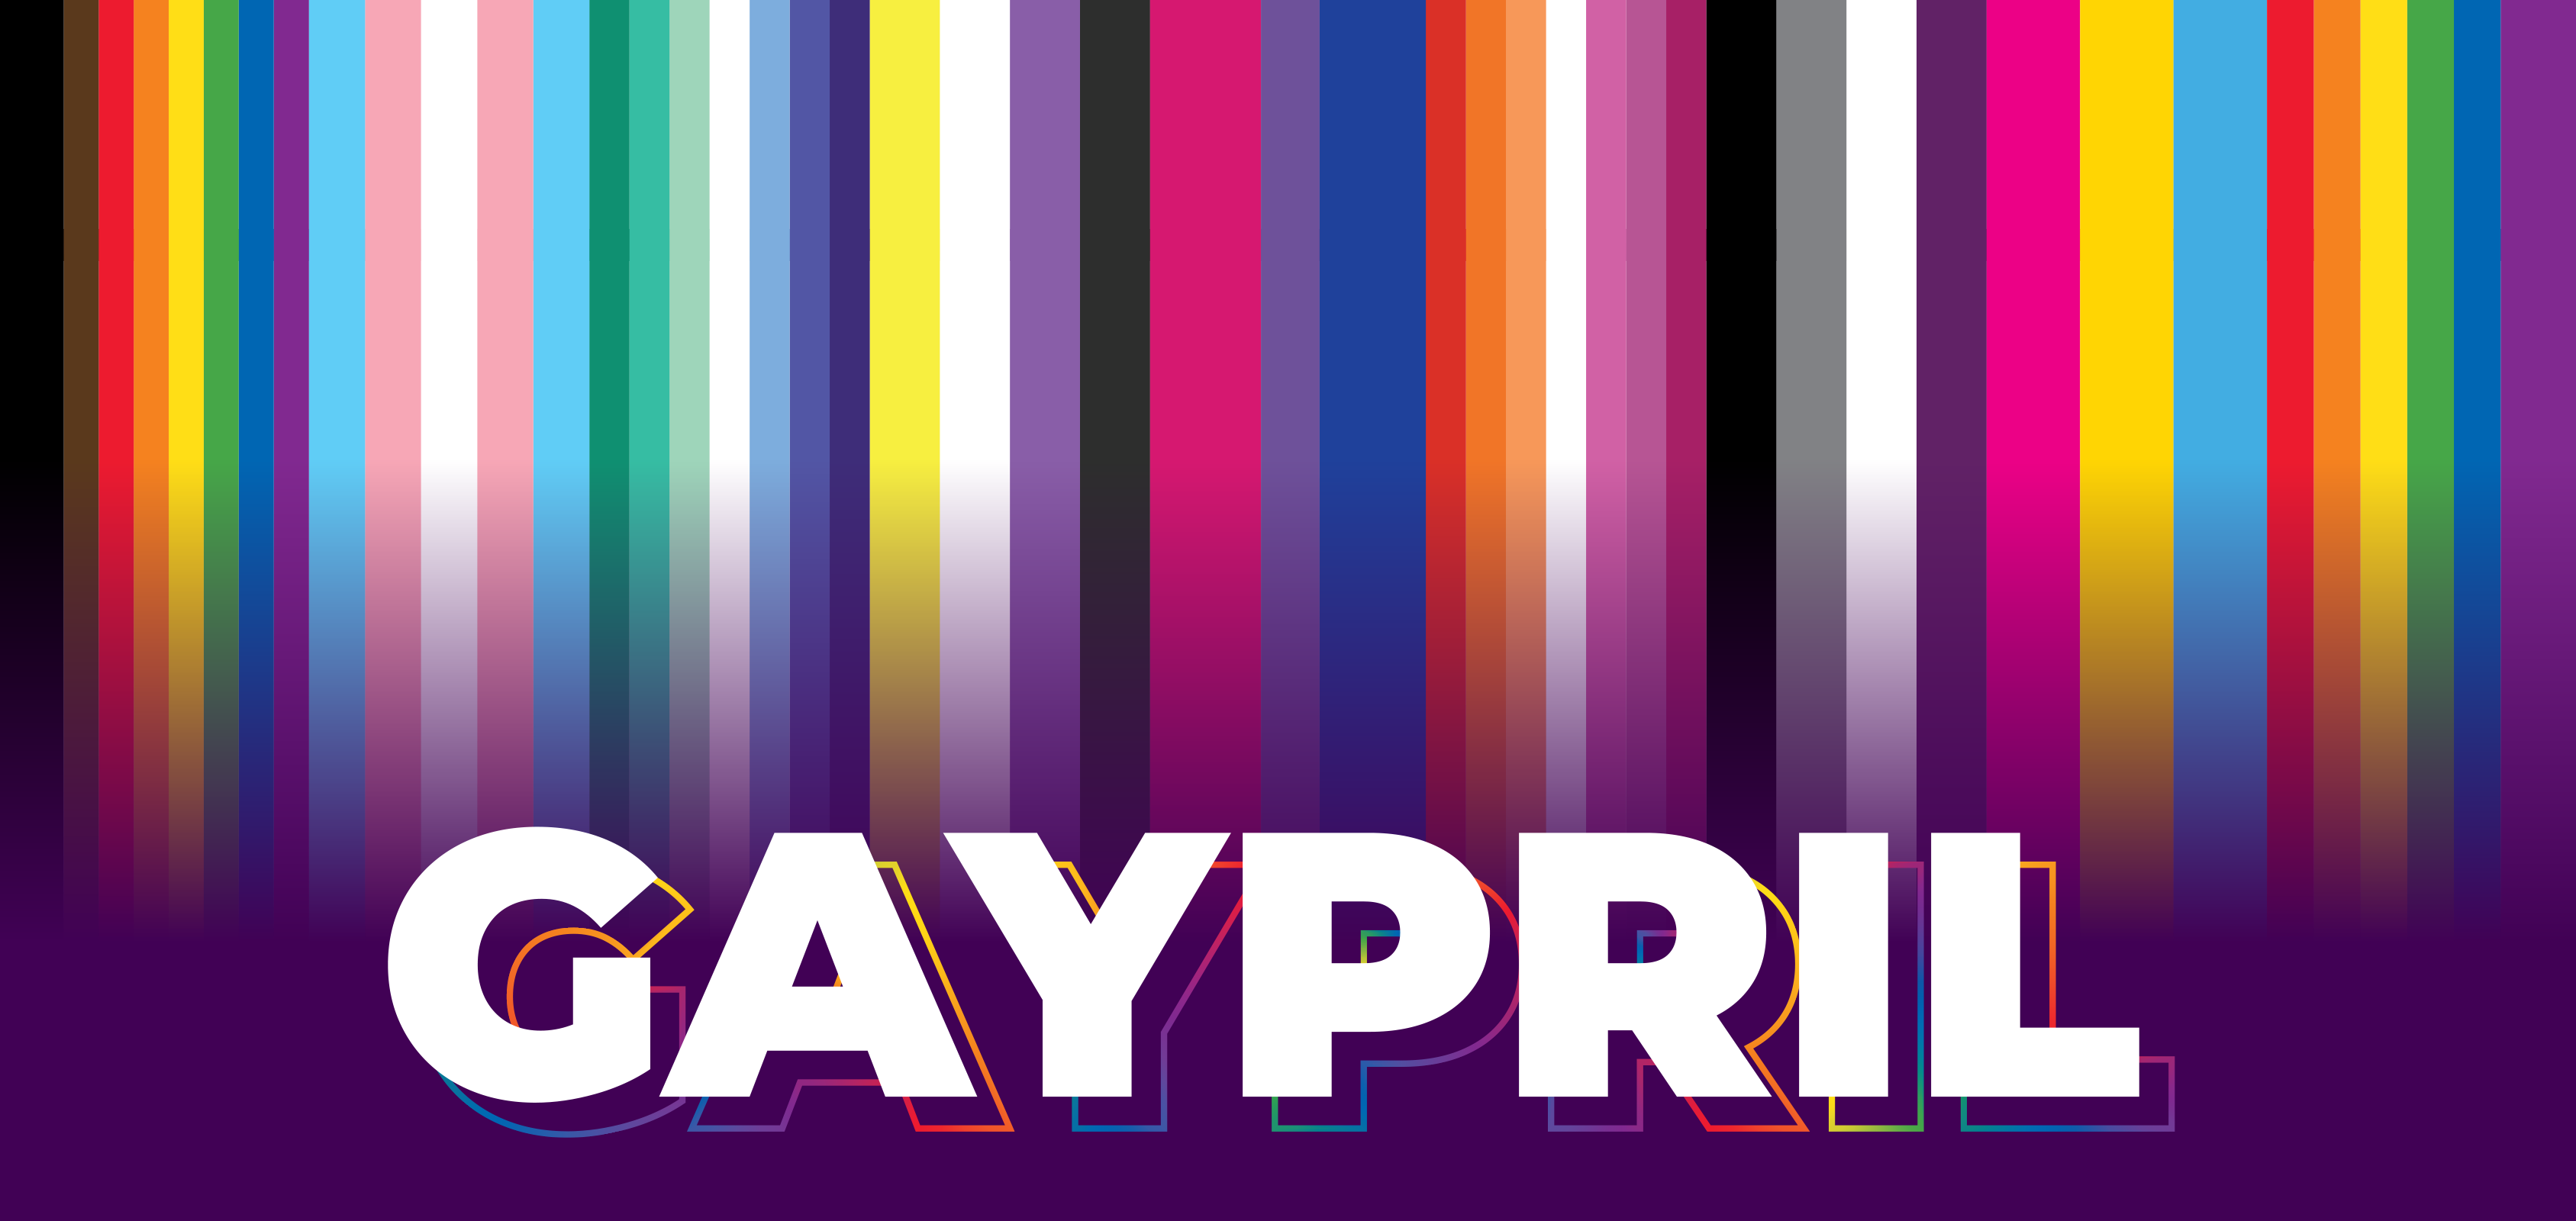 decorative 'Gaypril' month banner with white text 'Gaypril' on a background of multiple identity pride flags & purple